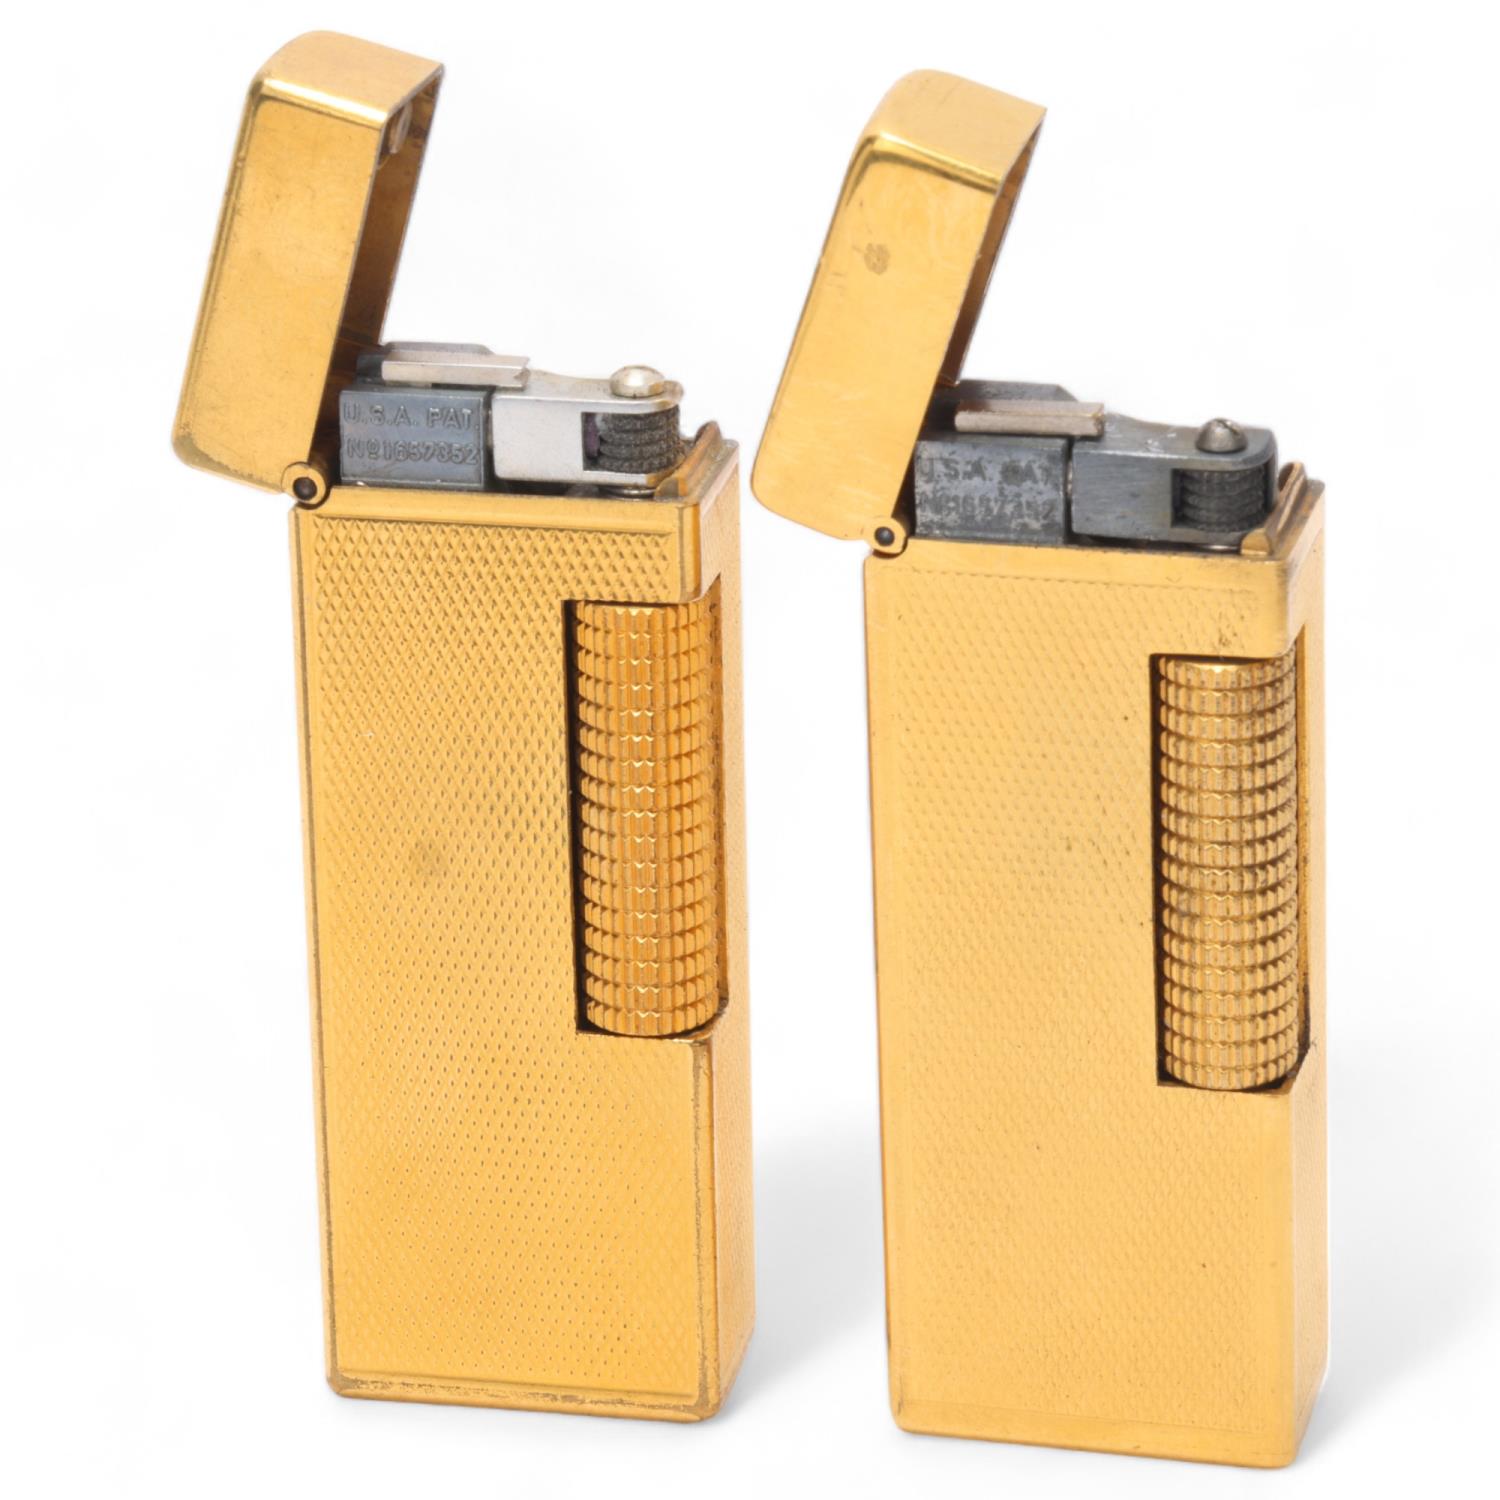 2 vintage Dunhill gold plated Rollagas lighters, with engine turned bodies, mechanism USA Pat No